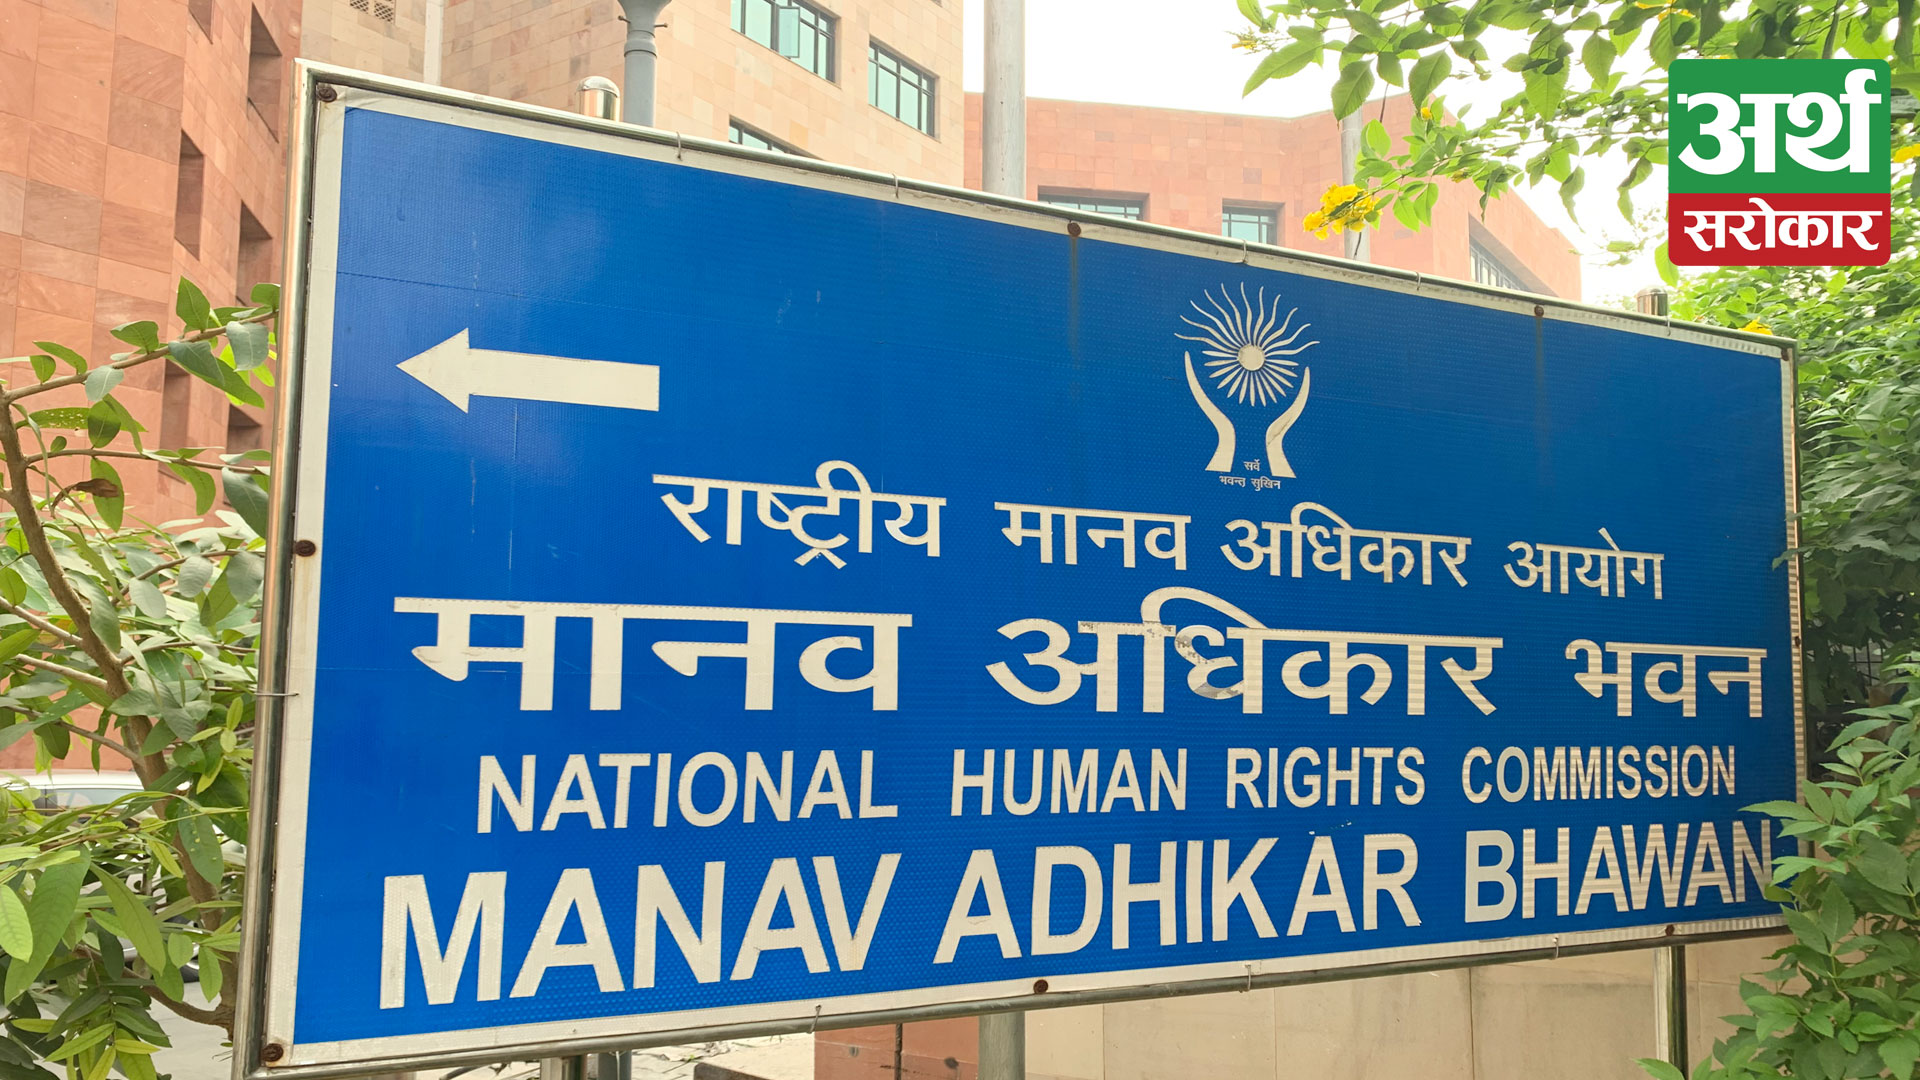 NHRC directs district administration to investigate into contaminated biscuit